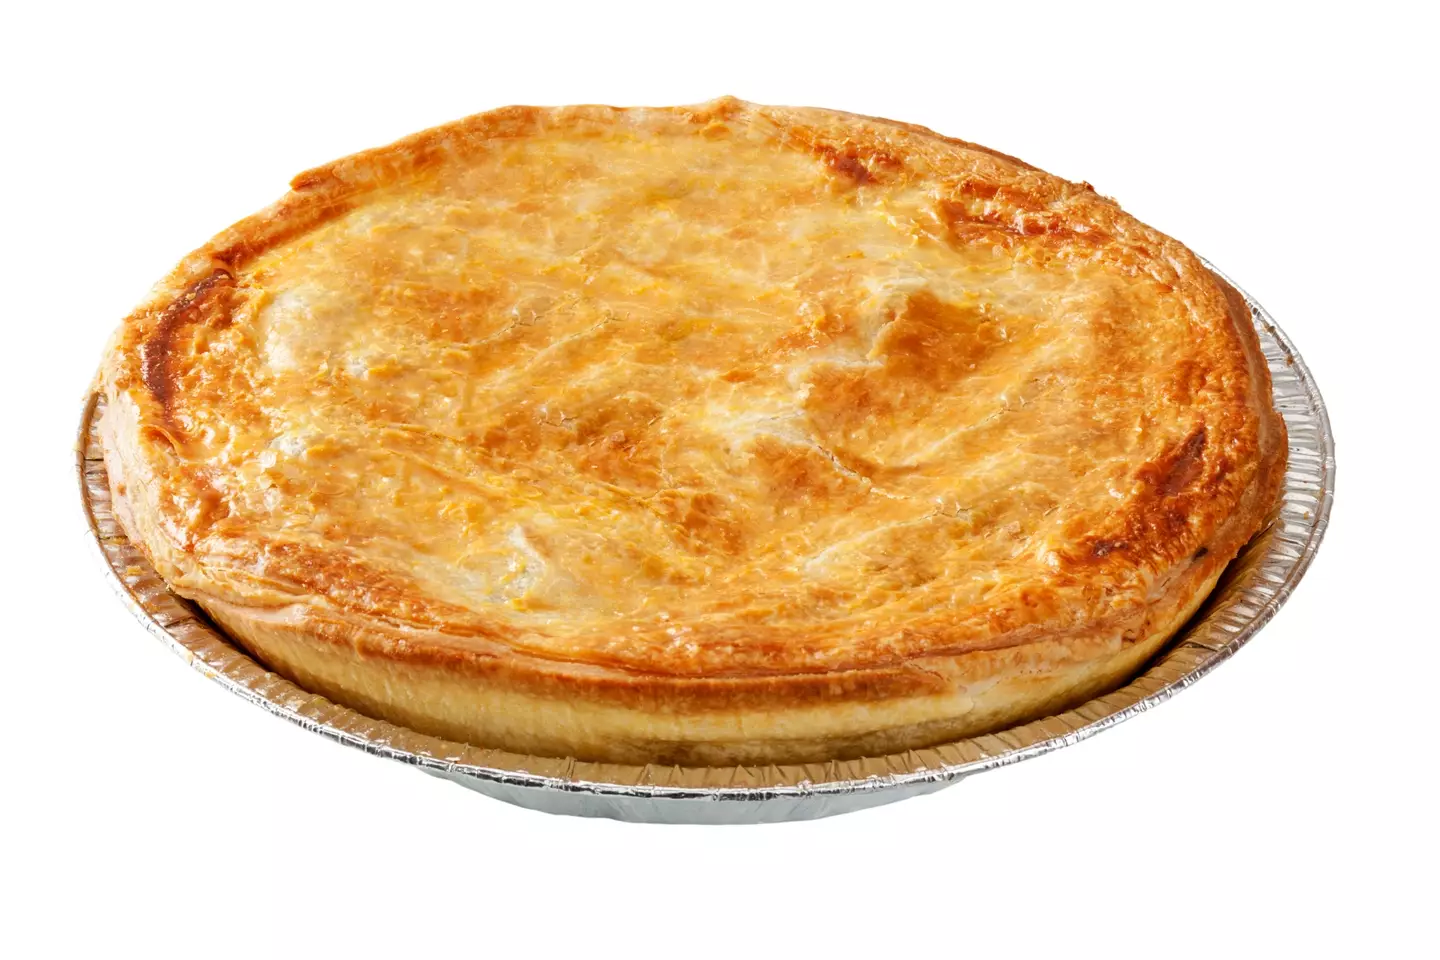 Steak pies are no-go on airplanes.